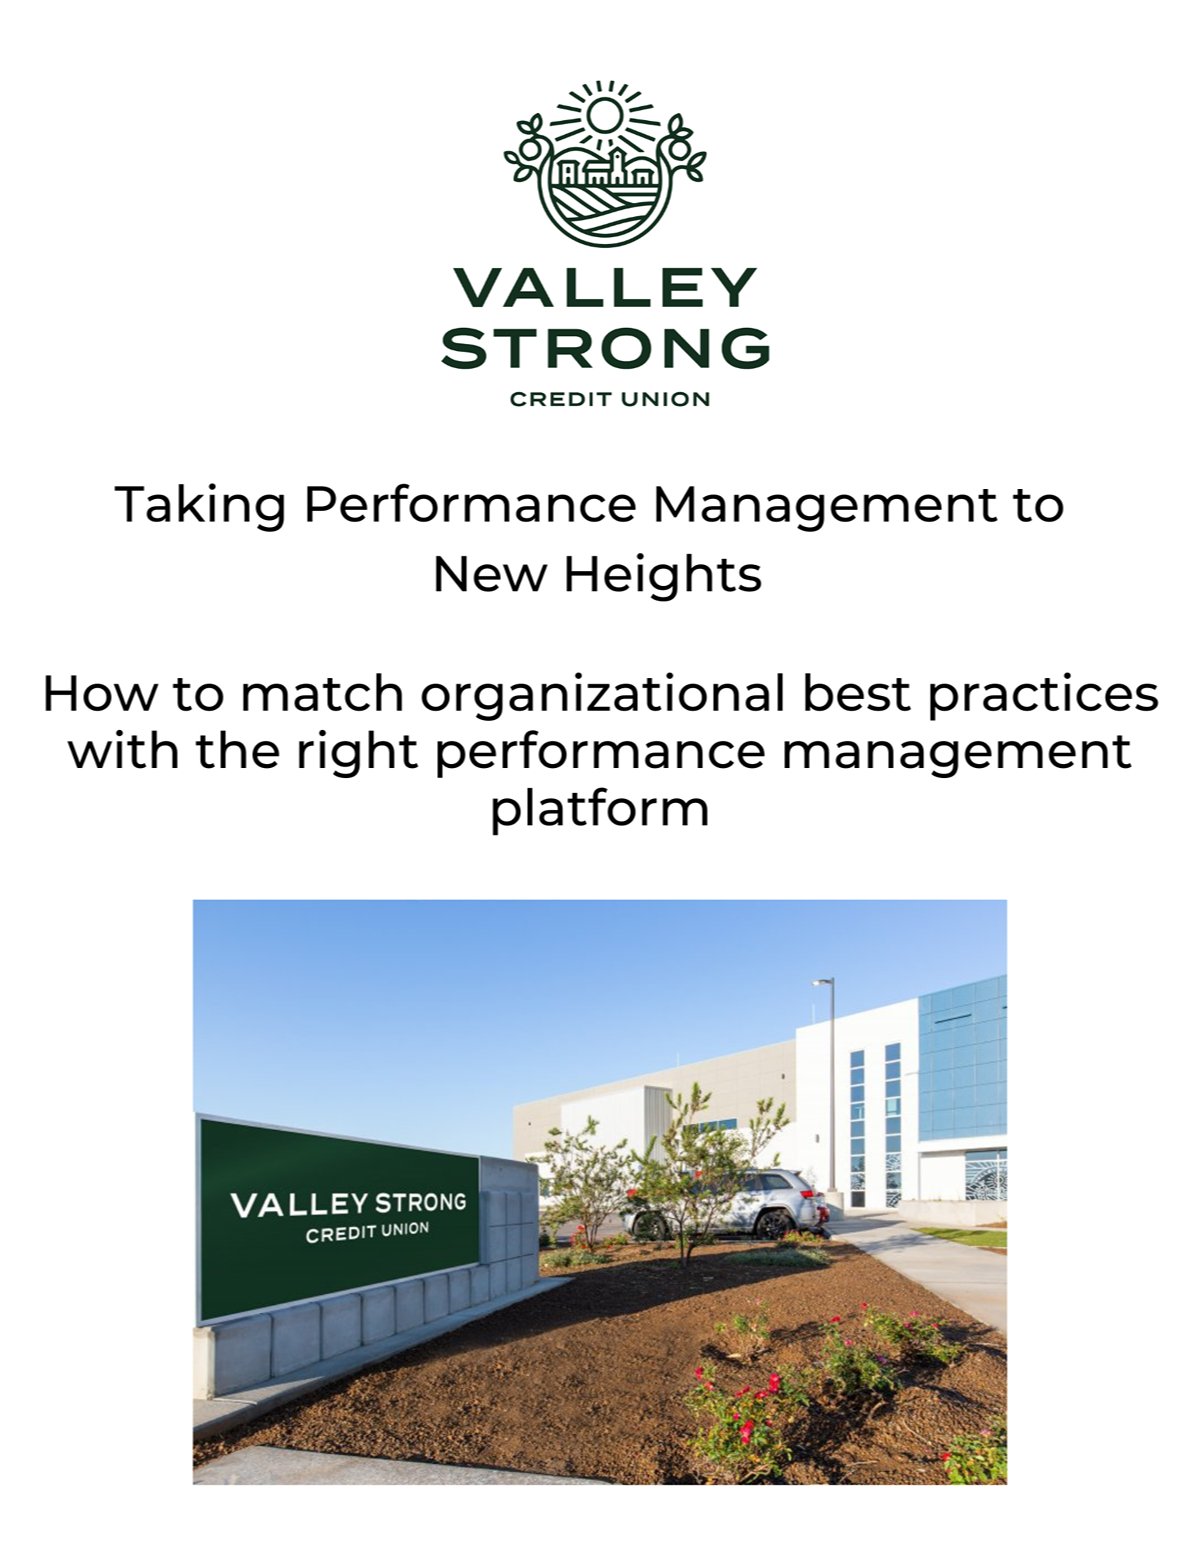 How Valley Strong Credit Union Used WorkDove to Take Performance Management to New Heights